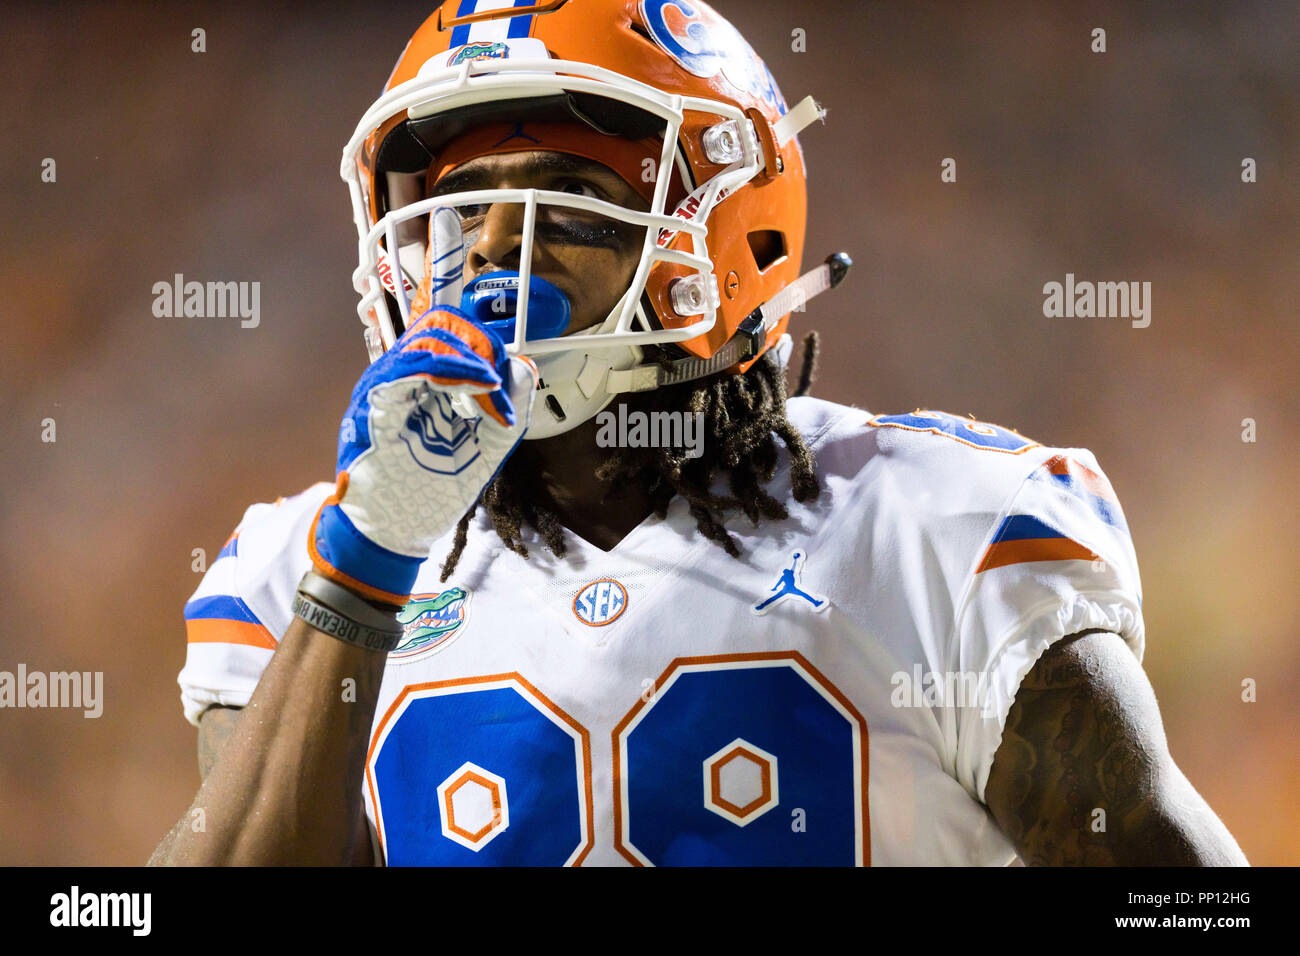 September 22, 2018: Tyrie Cleveland #89 of the Florida Gators gestures to the crowd after scoring a touchdown during the NCAA football game between the University of Tennessee Volunteers and the University of Florida Gators in Knoxville, TN Tim Gangloff/CSM Credit: Cal Sport Media/Alamy Live News Stock Photo